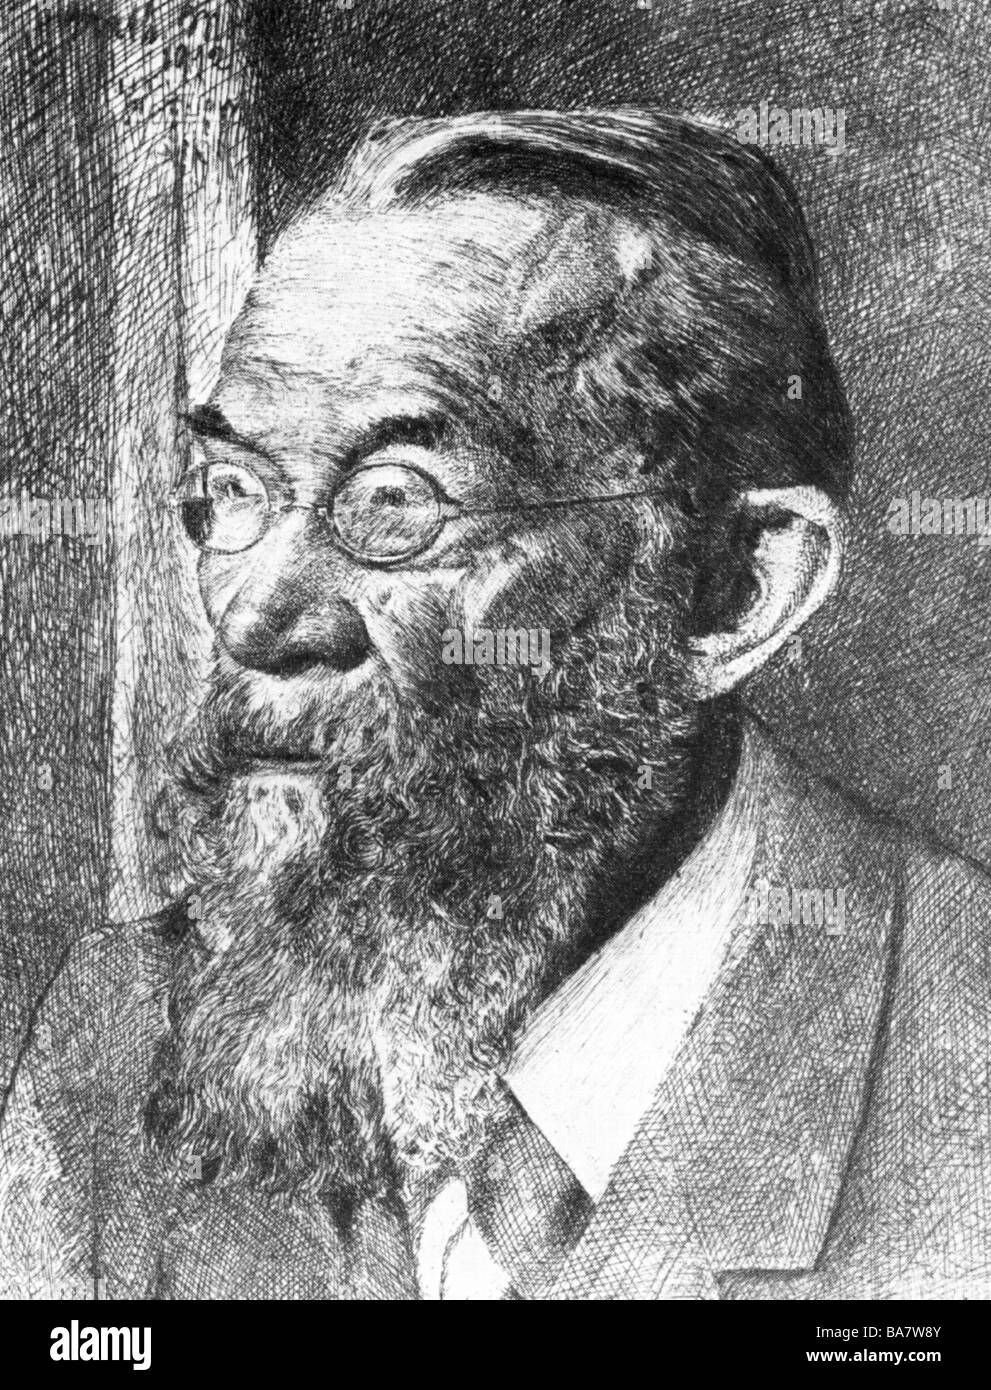 Wundt, Wilhelm, 16.8.1832 - 31.8.1920, German philosopher and psychologist, portrait, etching by Molitor, 1912, Stock Photo